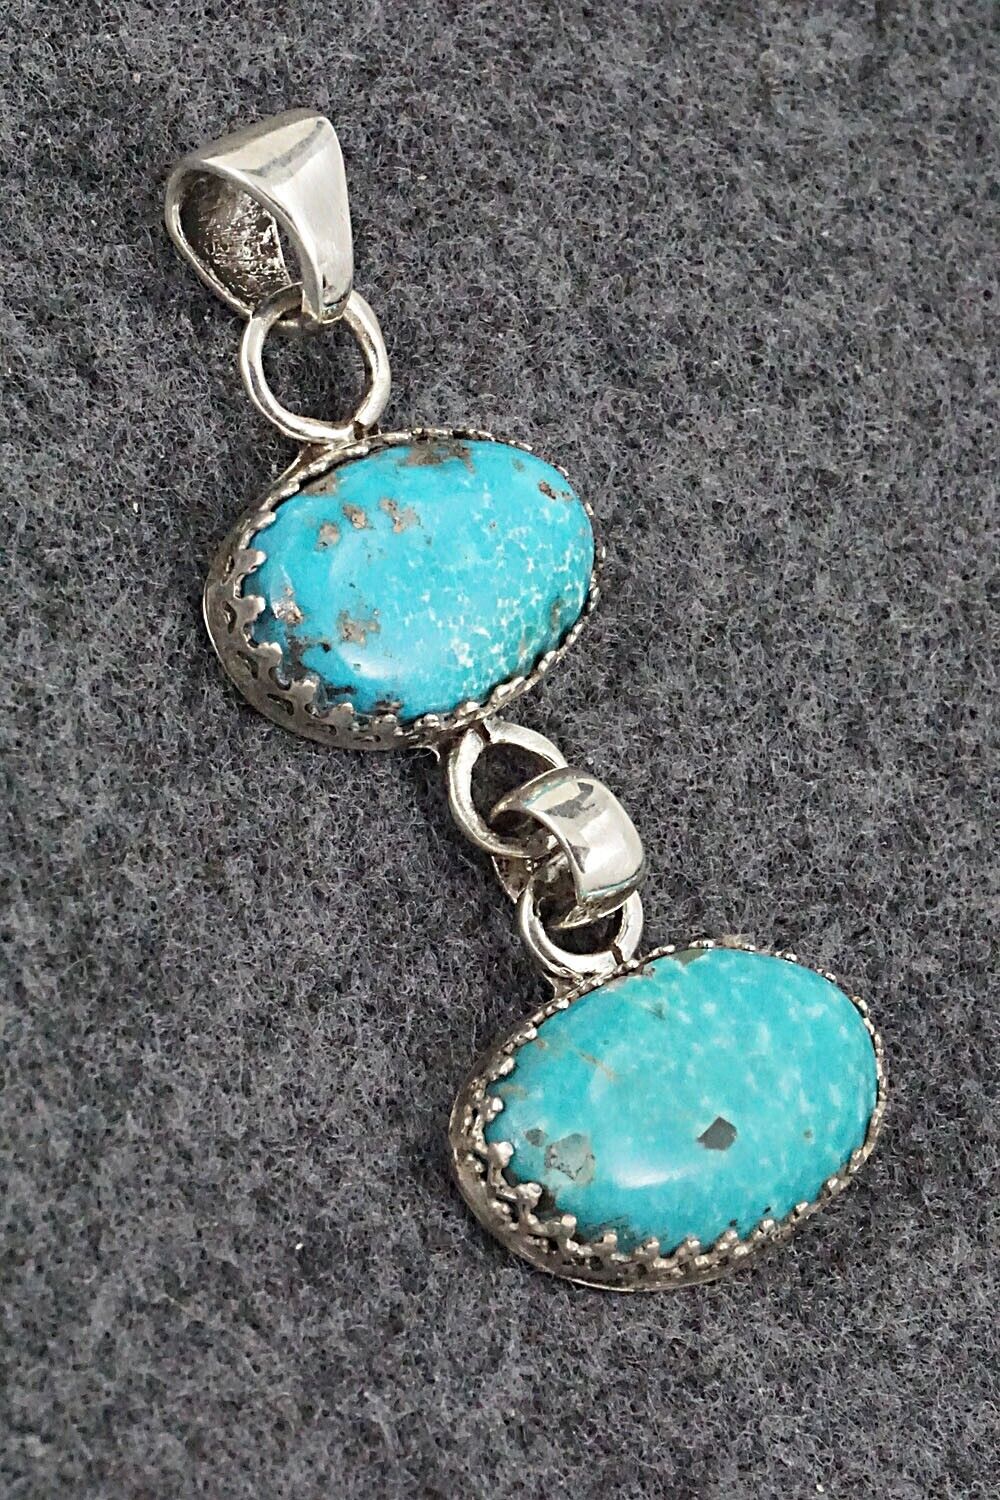 Turquoise and Sterling Silver Pendant - Matilda Chattin